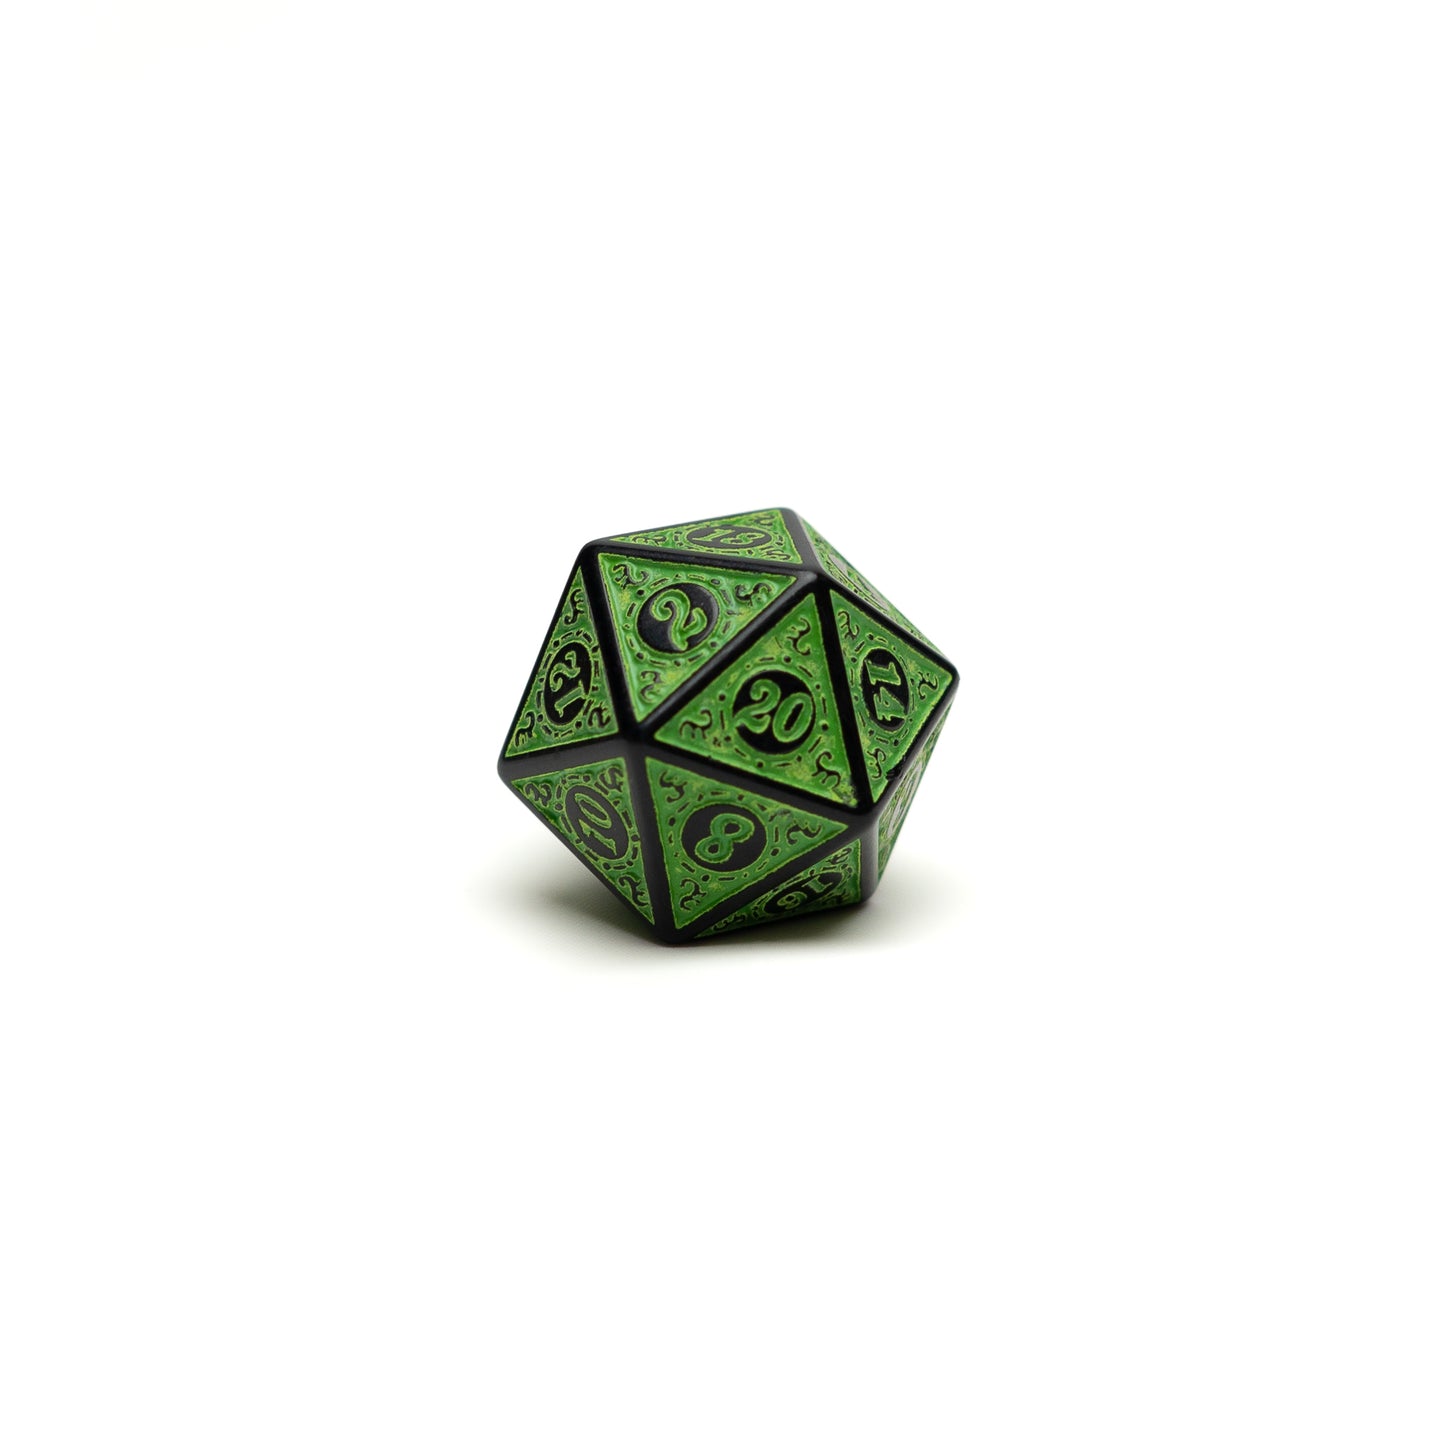 Roll Britannia Keth Frostiron Dungeons and Dragons D20 Dice with Green Military Aesthetic